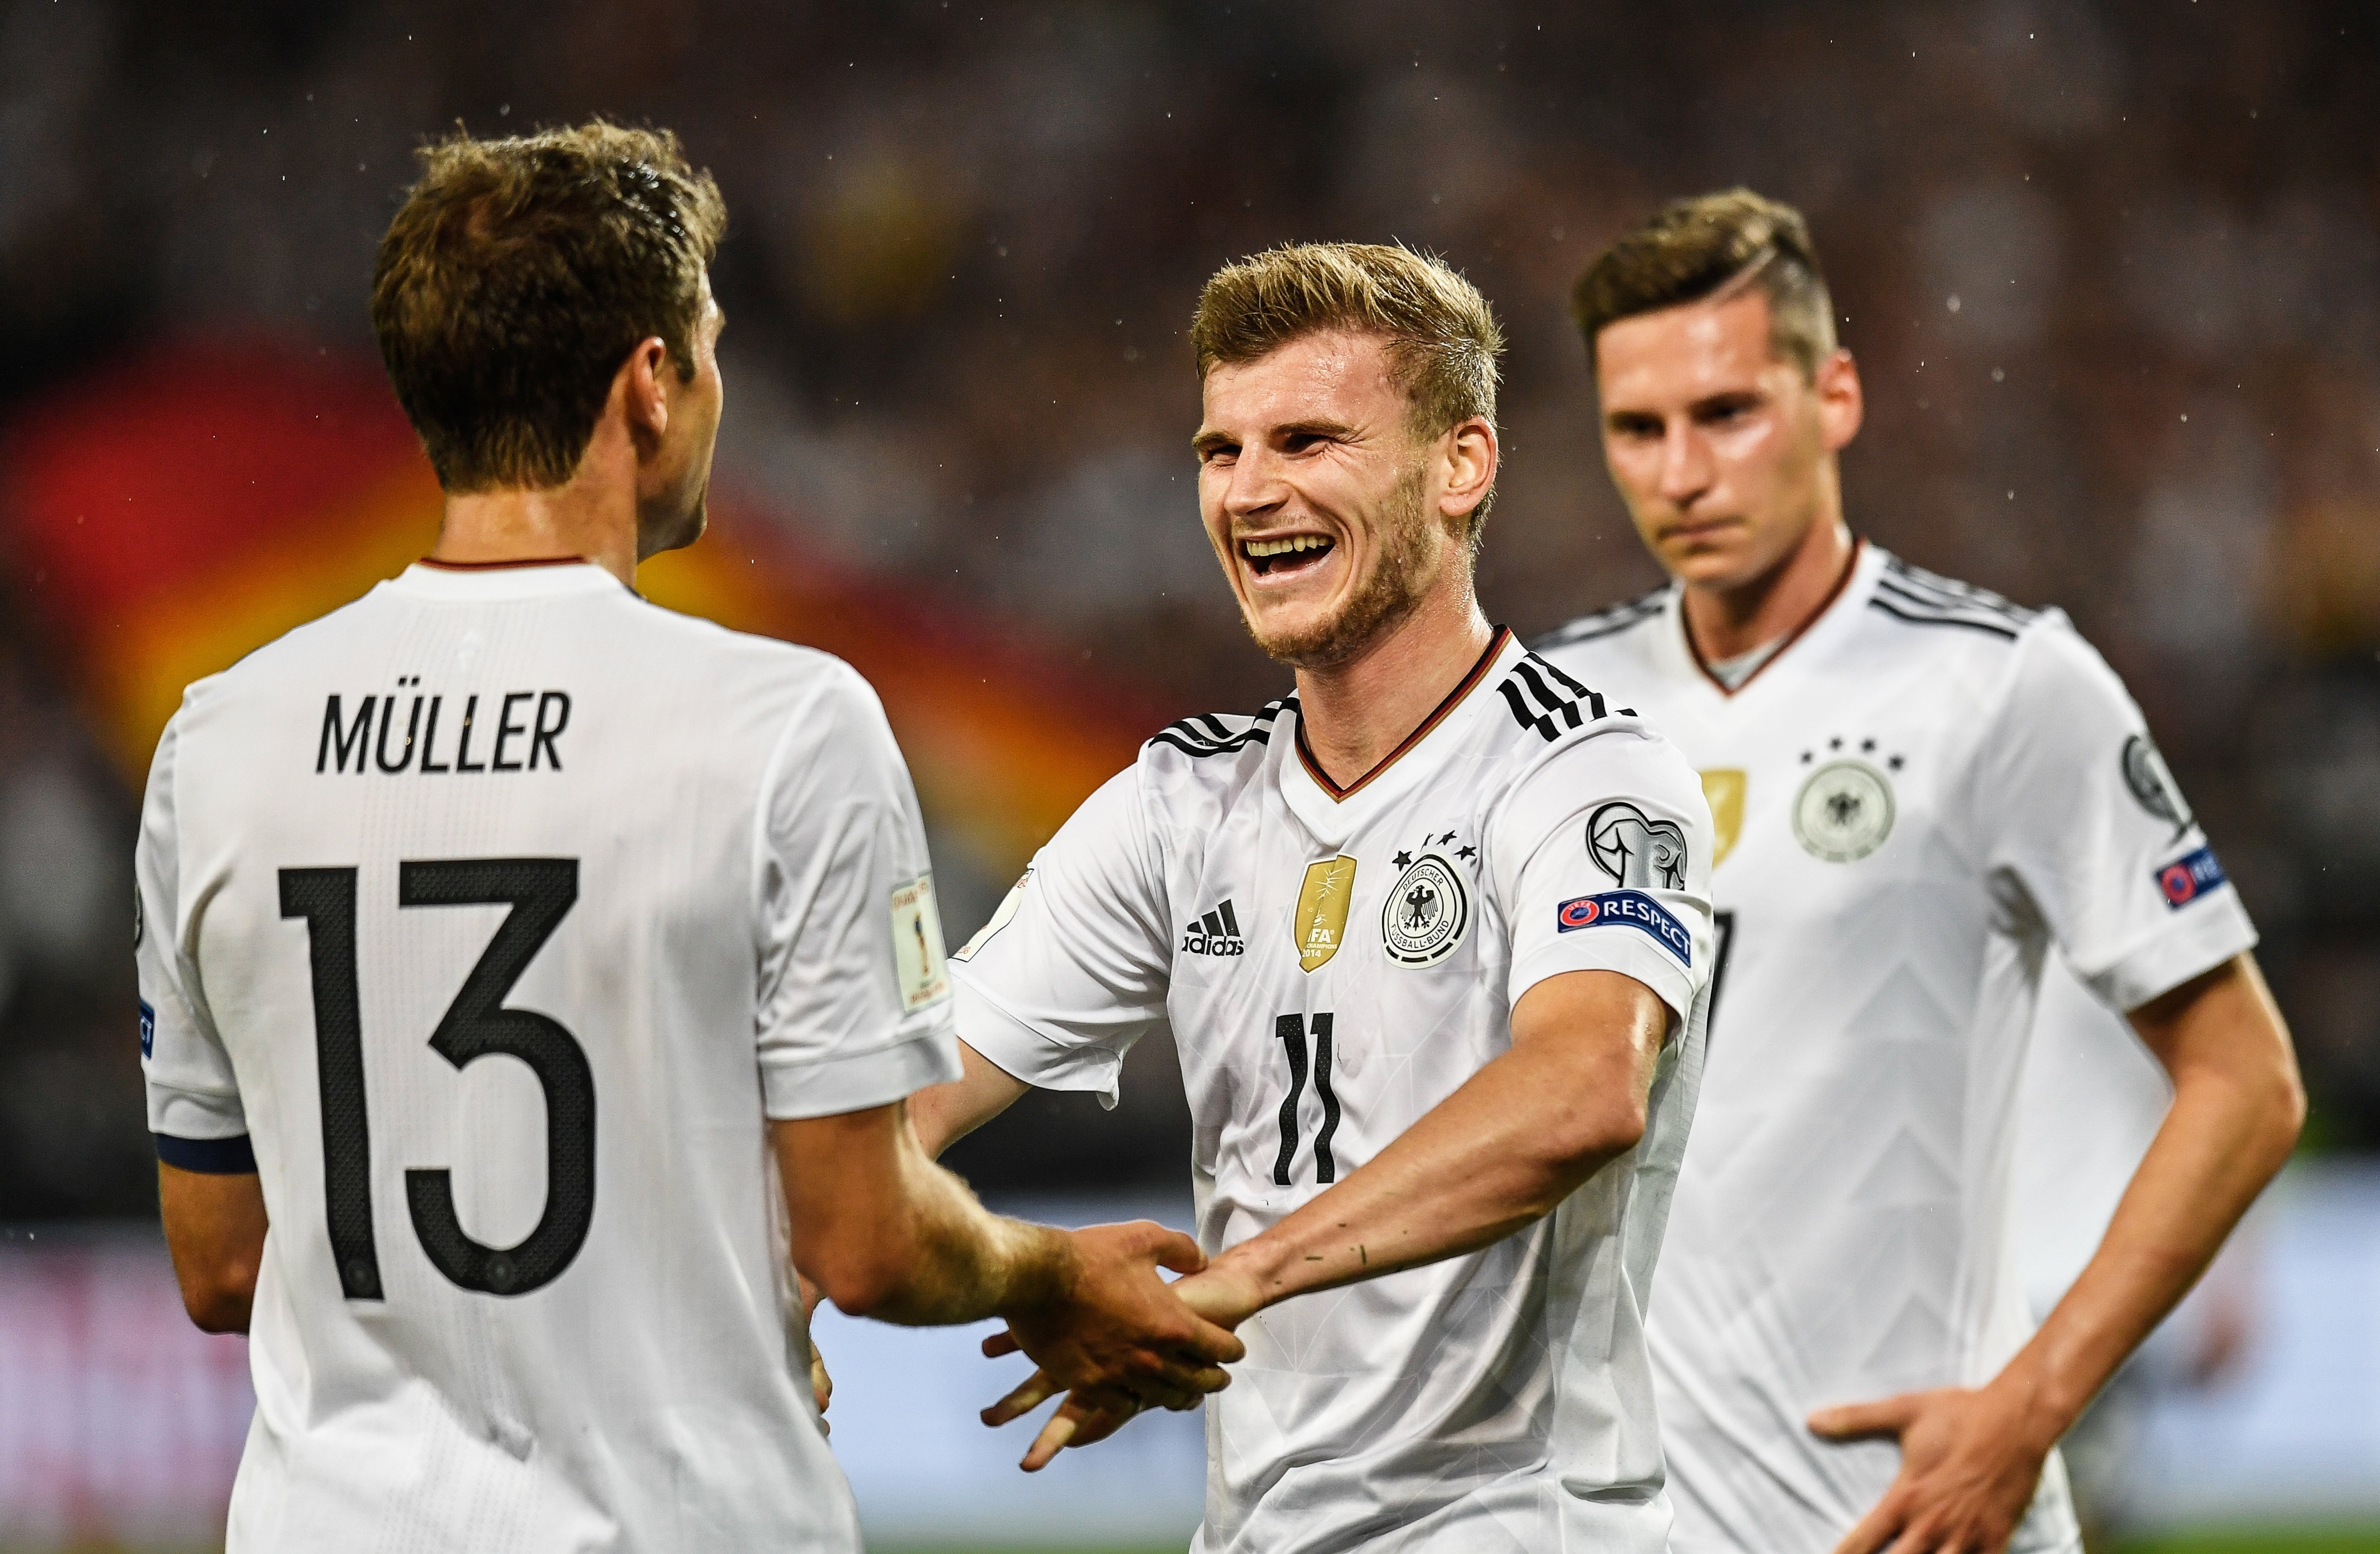 The players are good looking' - handsome German football team wins World Cup hearts and minds in China - South China Morning Post